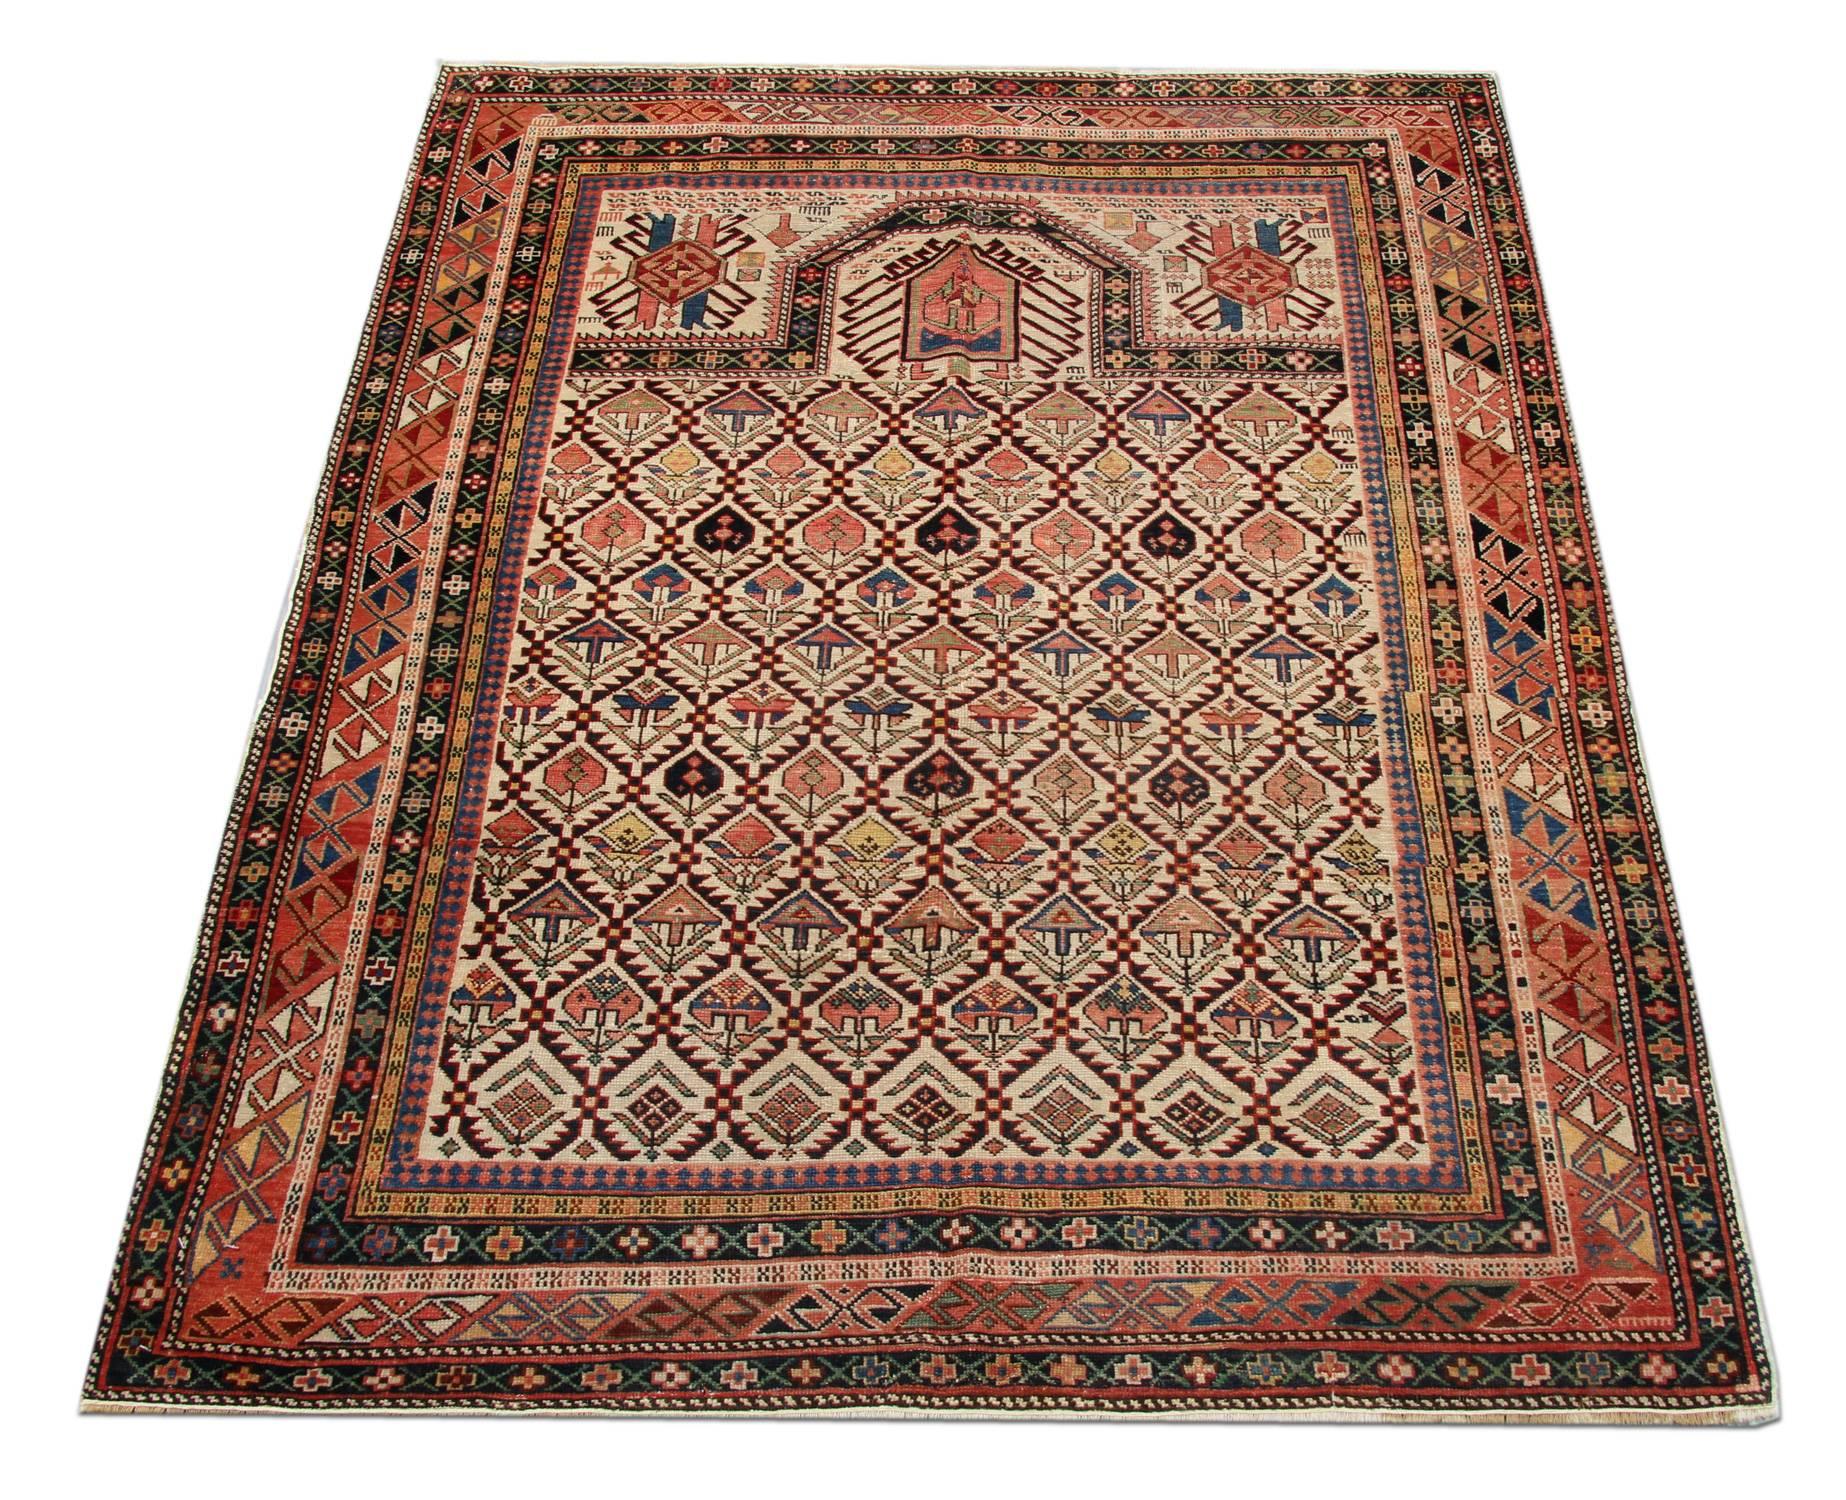 An excellent example of handmade carpet Caucasian carpet Oriental rug weaving from the Shirvan region. Though these ivory ground prayer patterned rugs may seem like from a distance, this woven rug has a great range of colors. This geometric rug has